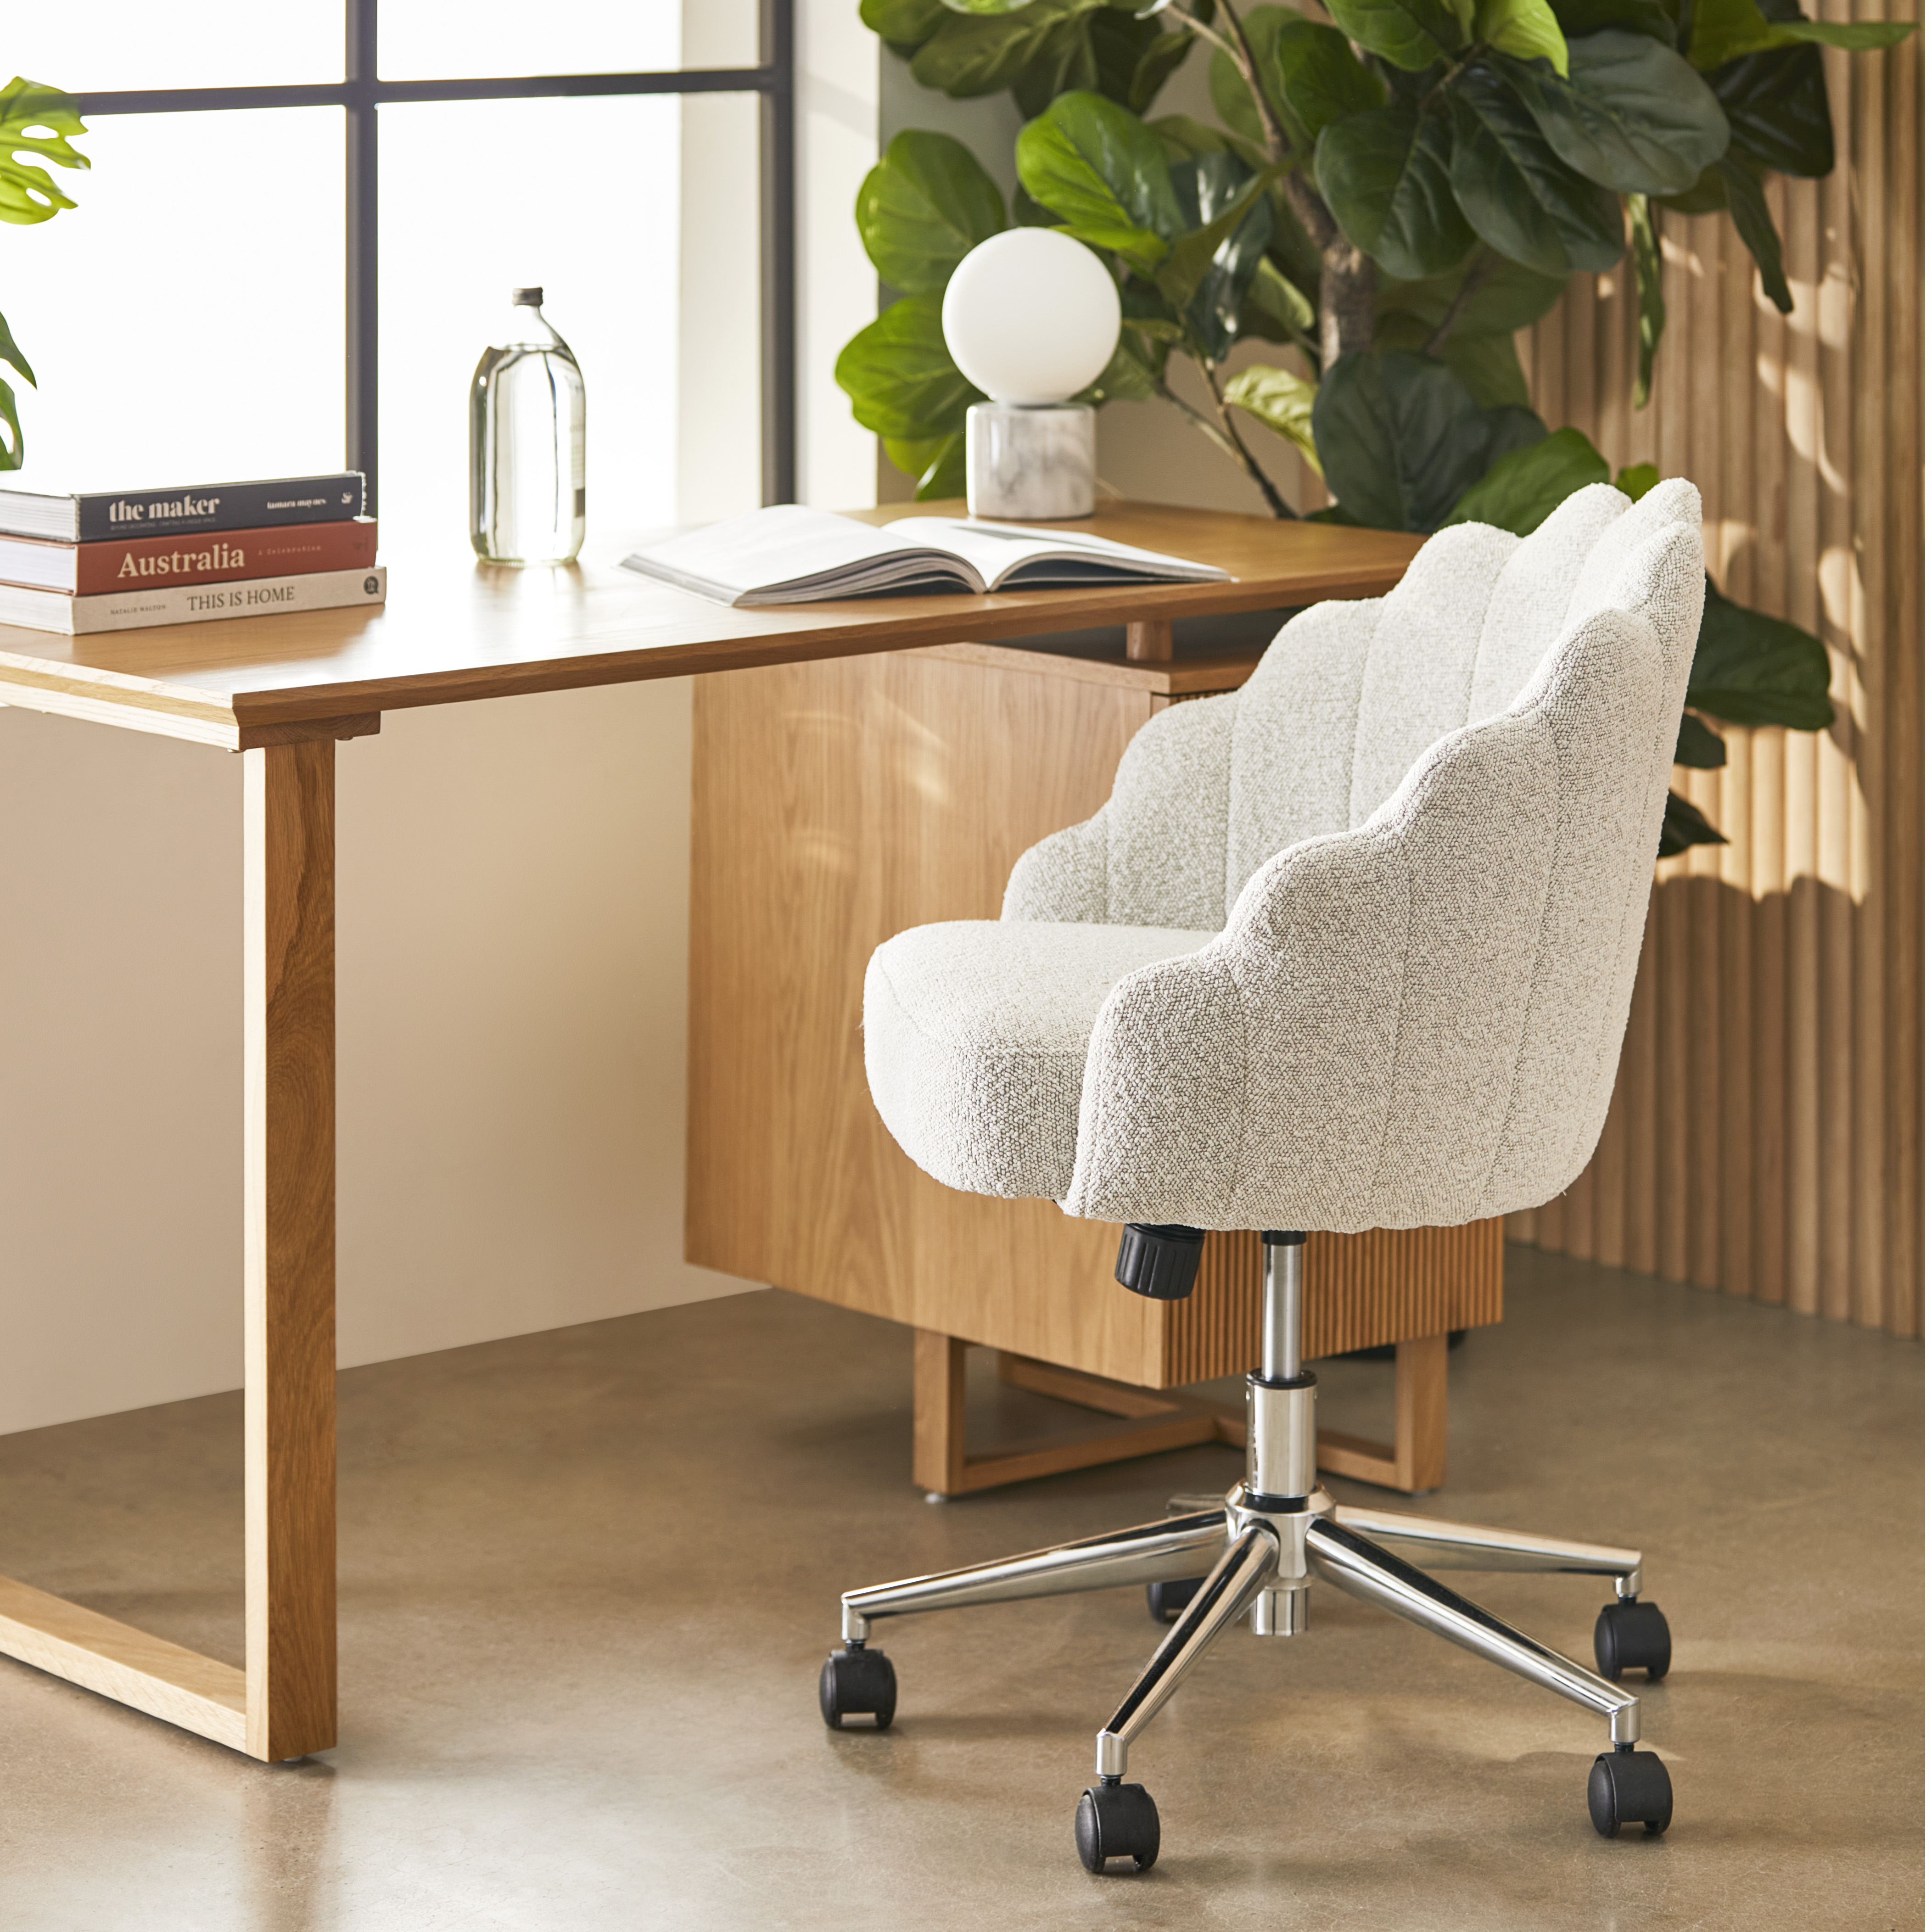 https://www.adairs.com.au/globalassets/13.-ecommerce/03.-product-images/2023_images/furniture/office-furn/desk-chairs/55220_snowboucle_01.jpg